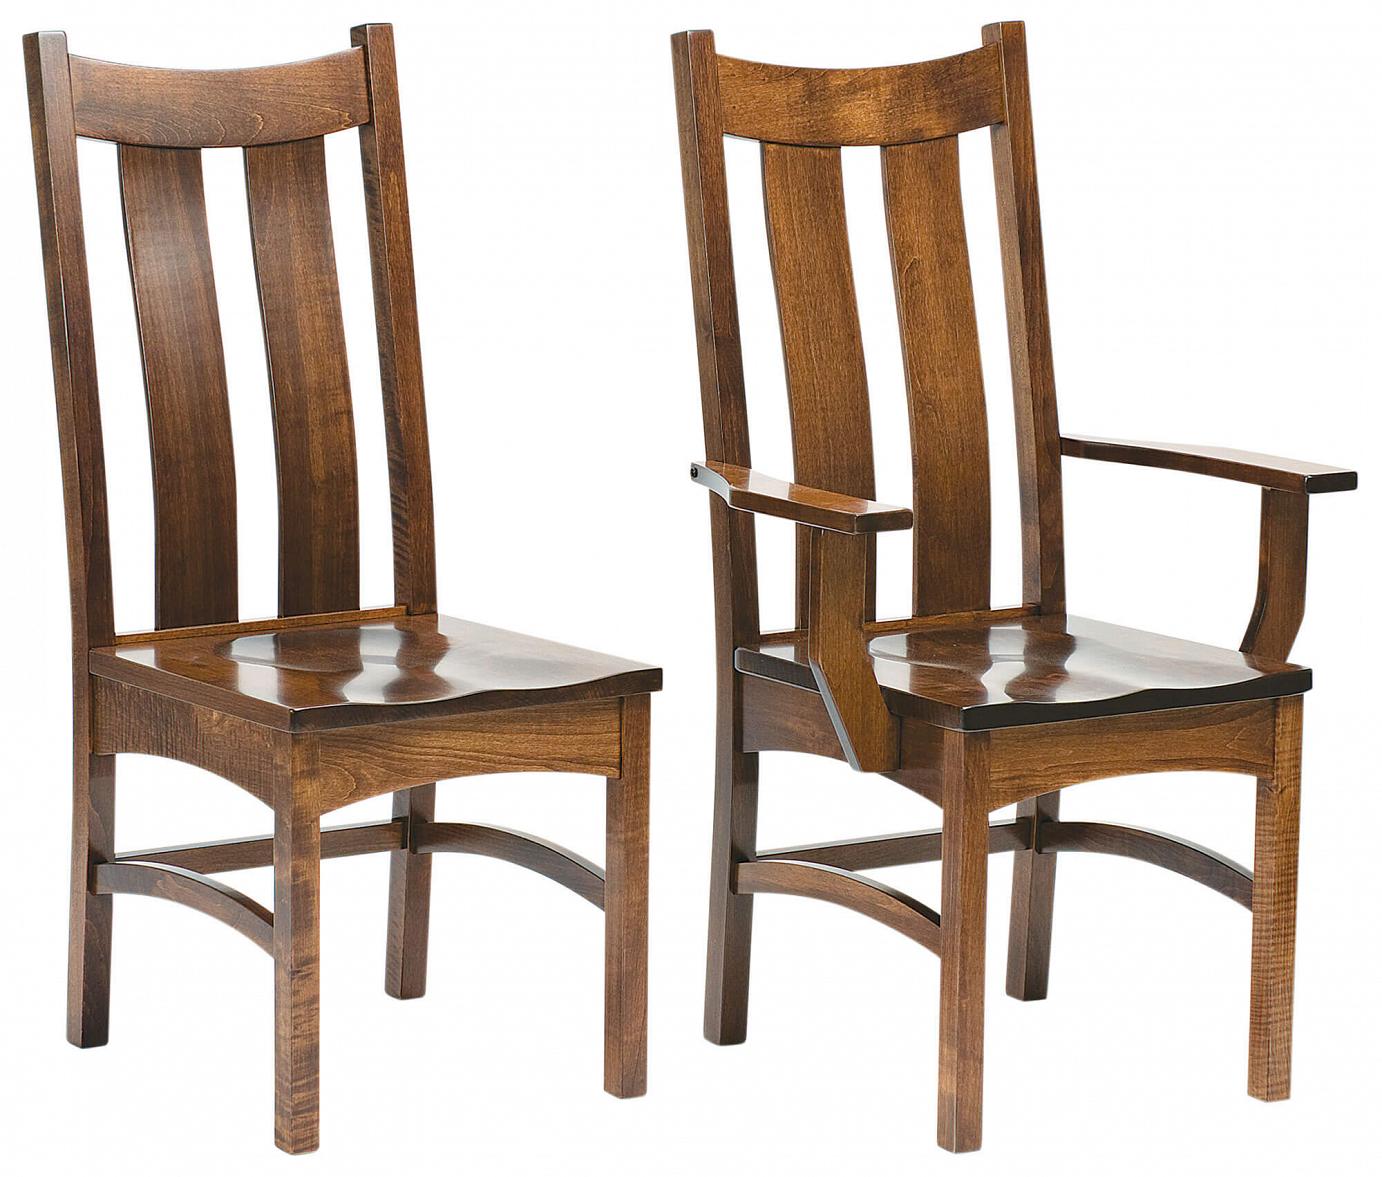 RH Yoder Country Shaker Chairs